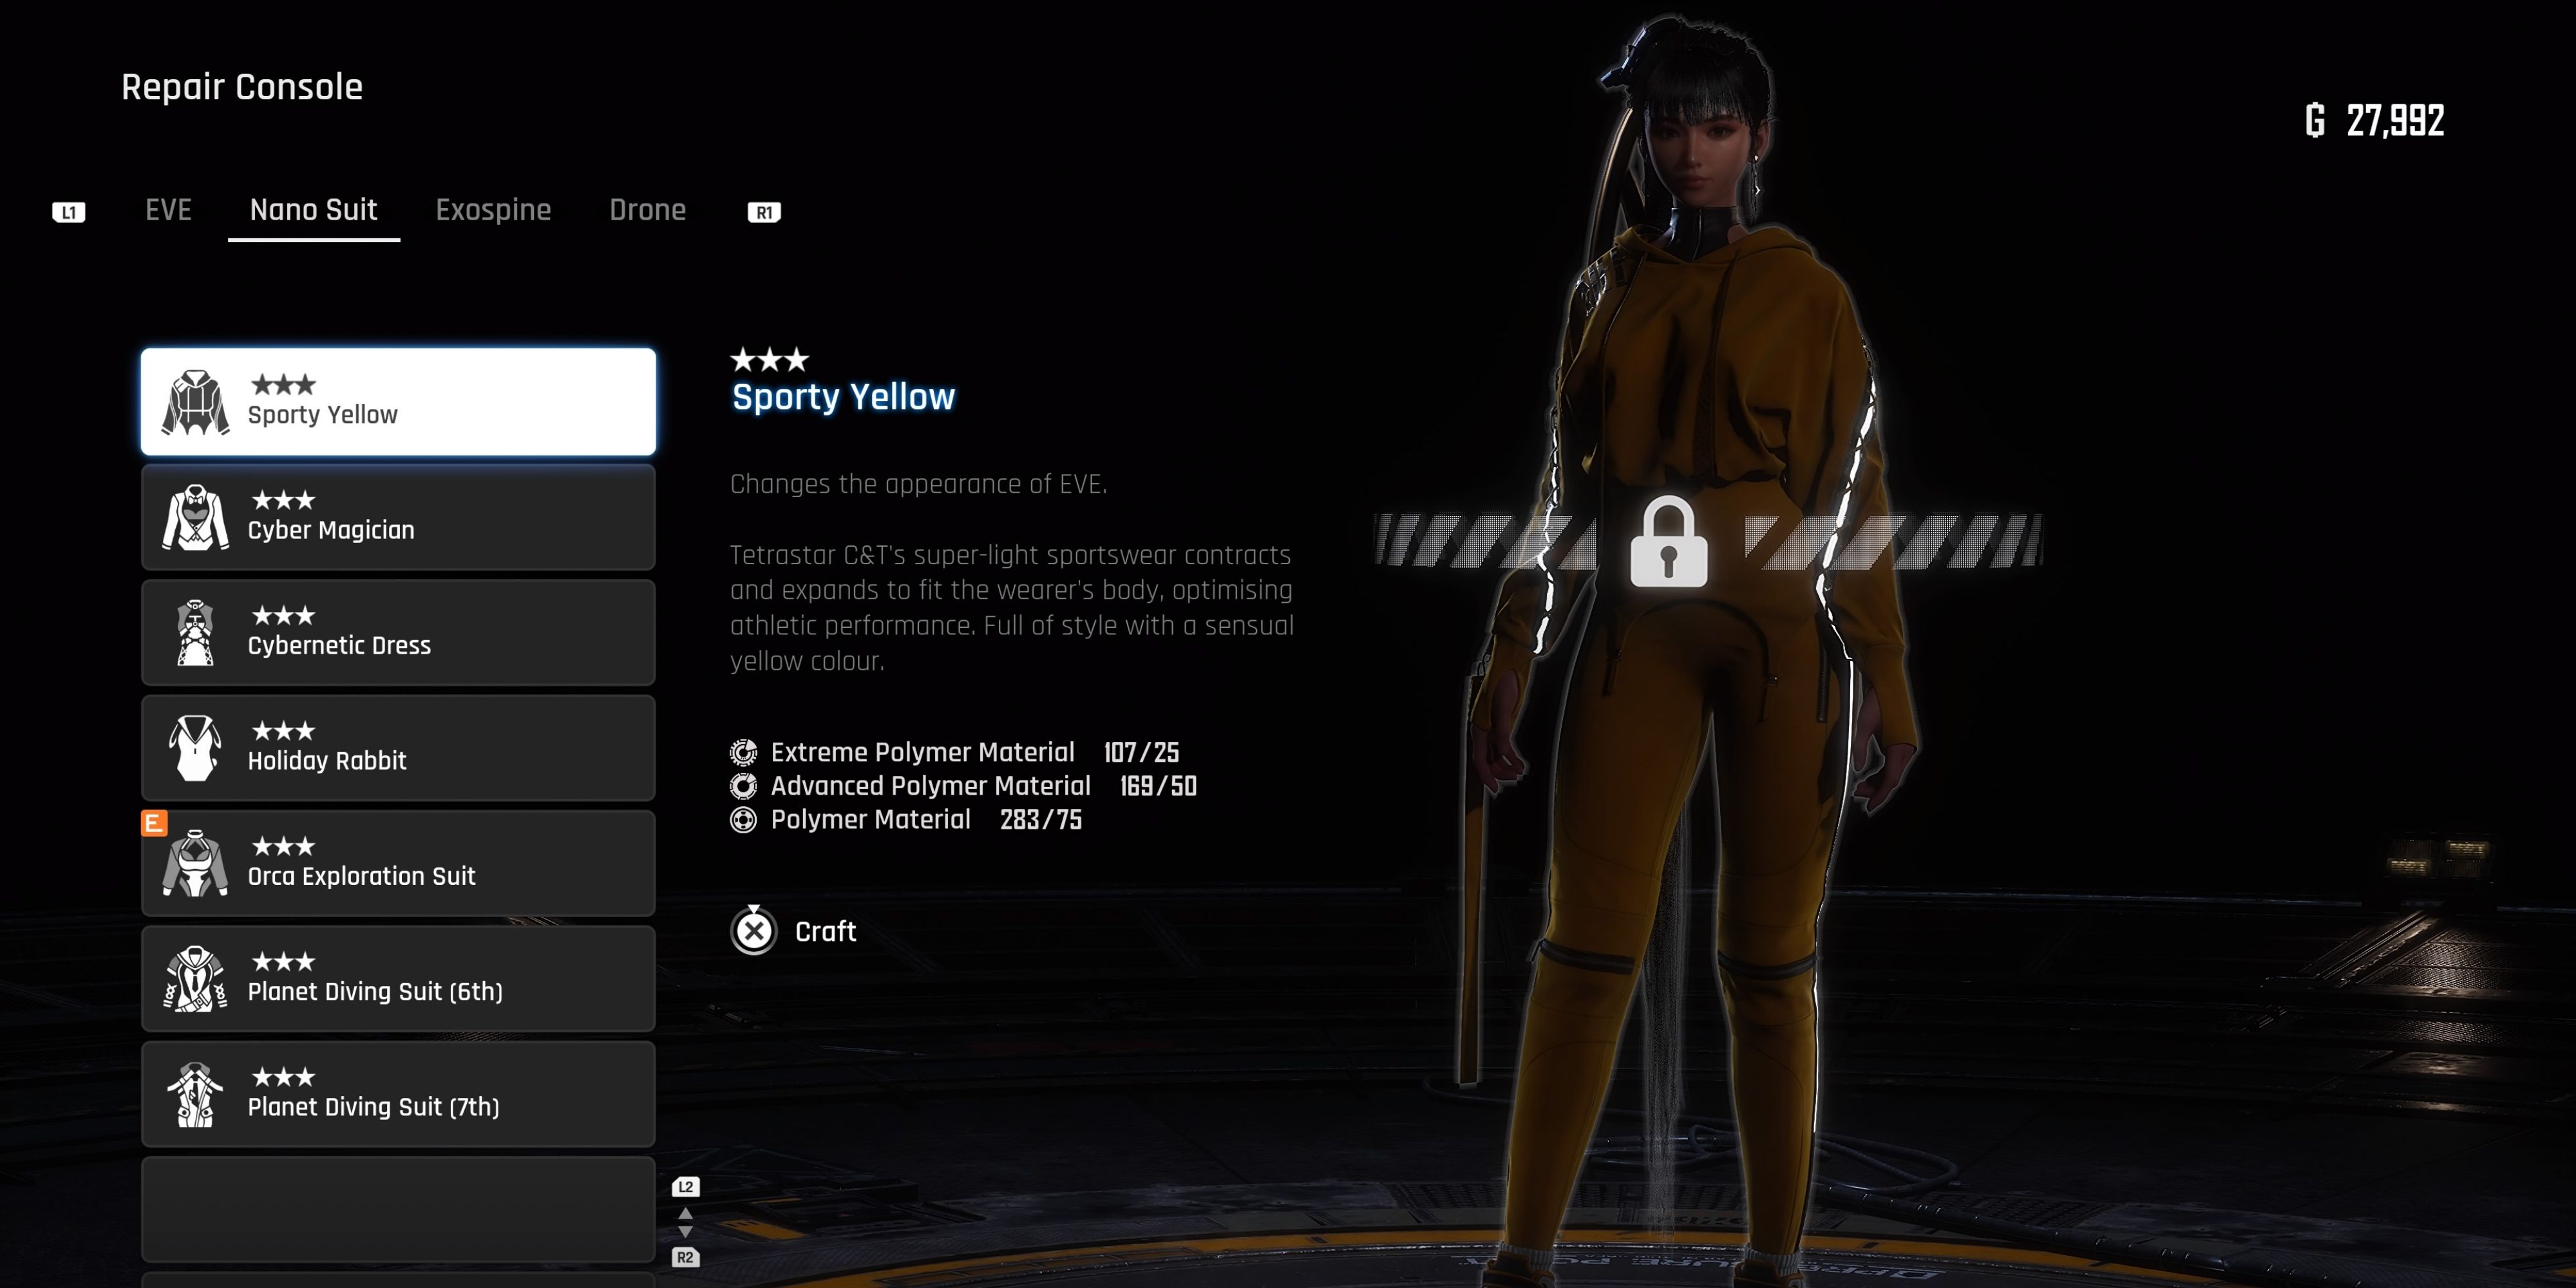 Stellar Blade: How To Access The Forbidden Area In The Wasteland (Sporty Yellow Outfit Location)